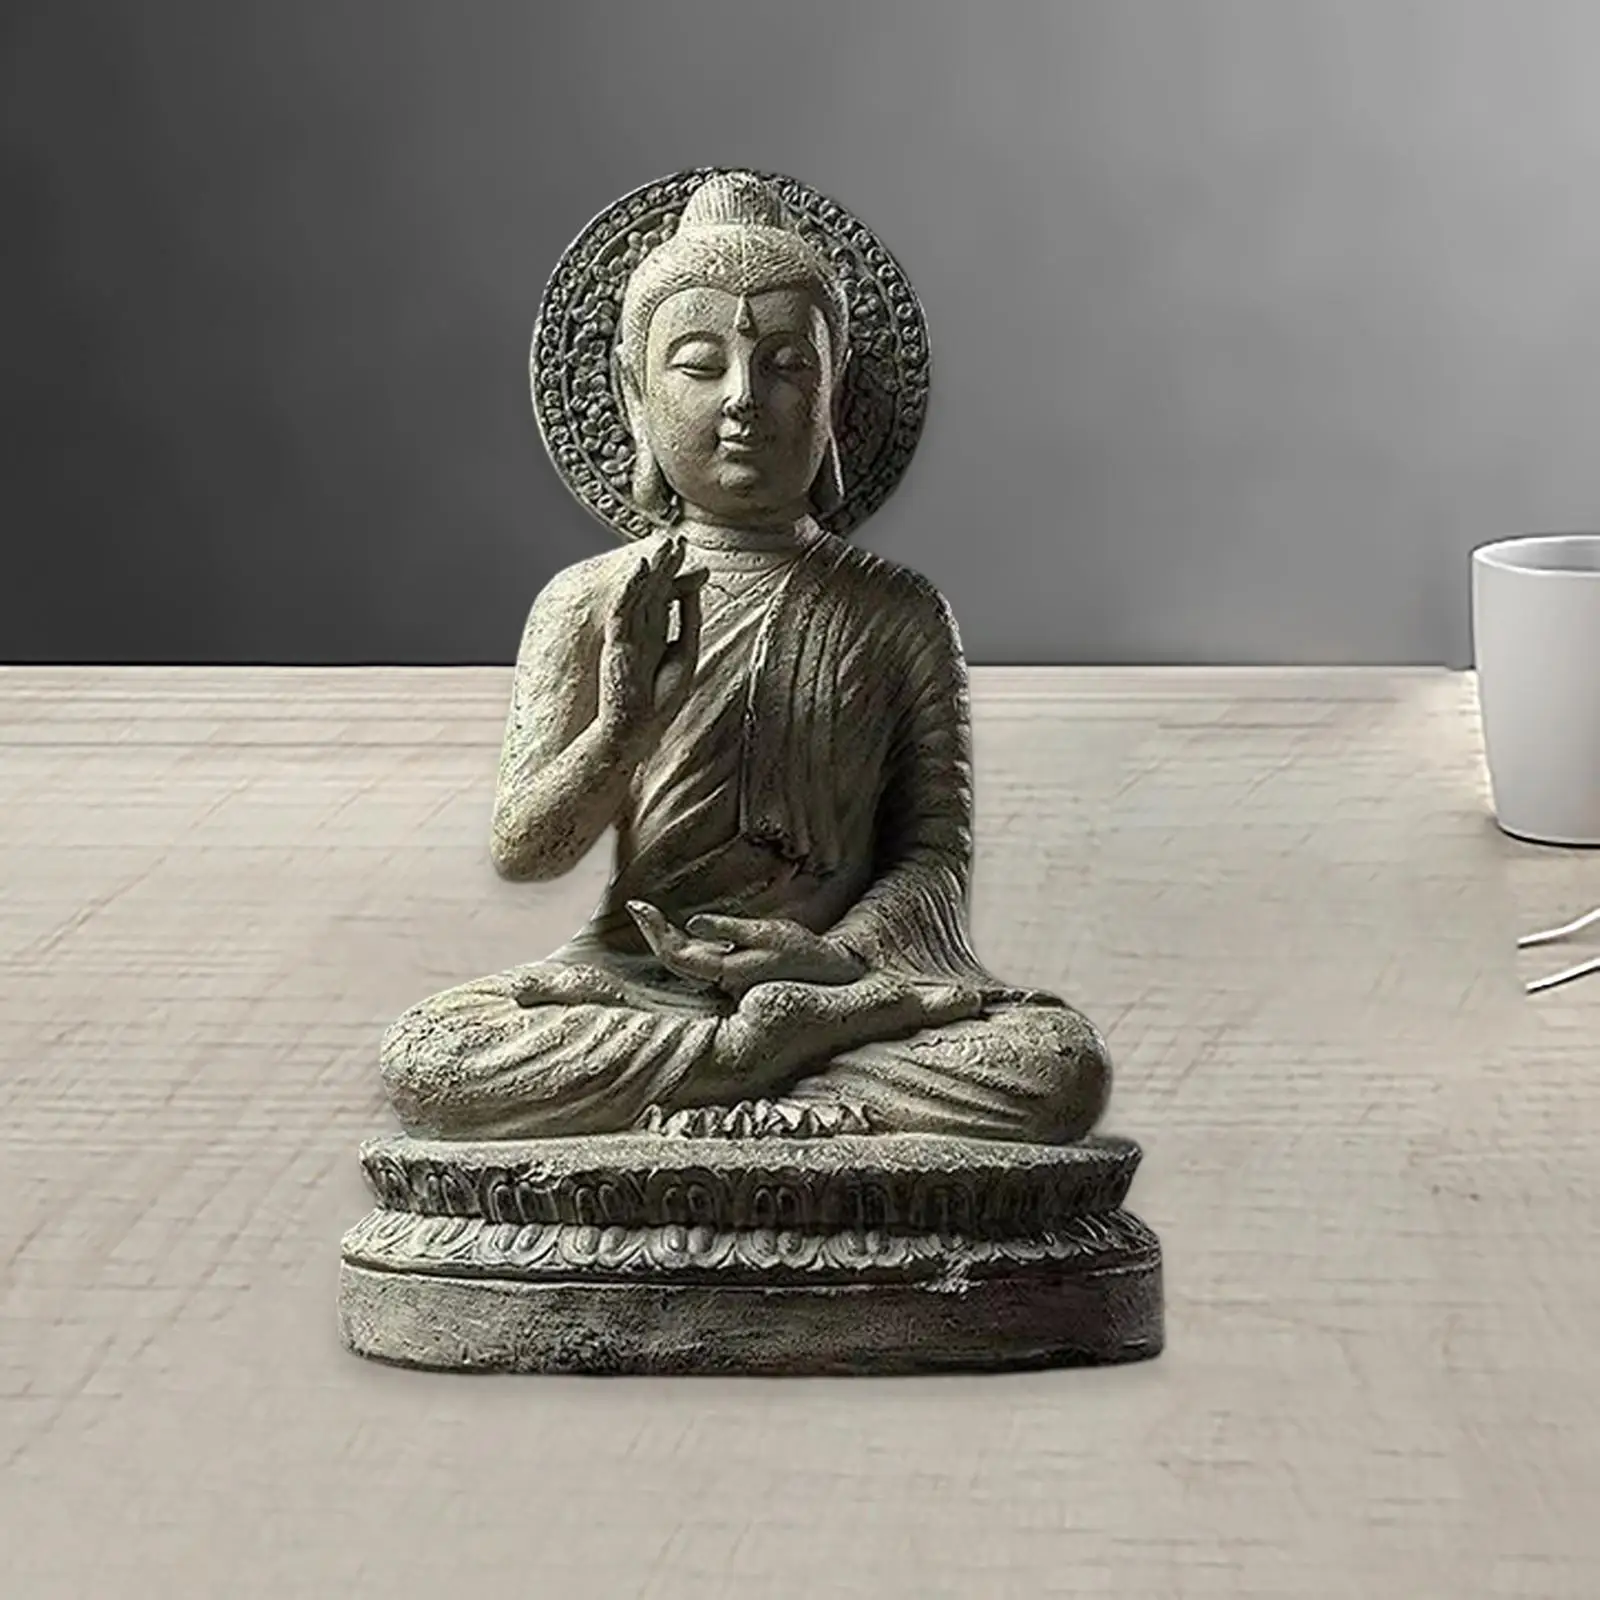 Sitting Meditating Buddha Statue Figurine Enlightened One Sculpture Fengshui Restorative Gift Small for Tabletop Office Decor